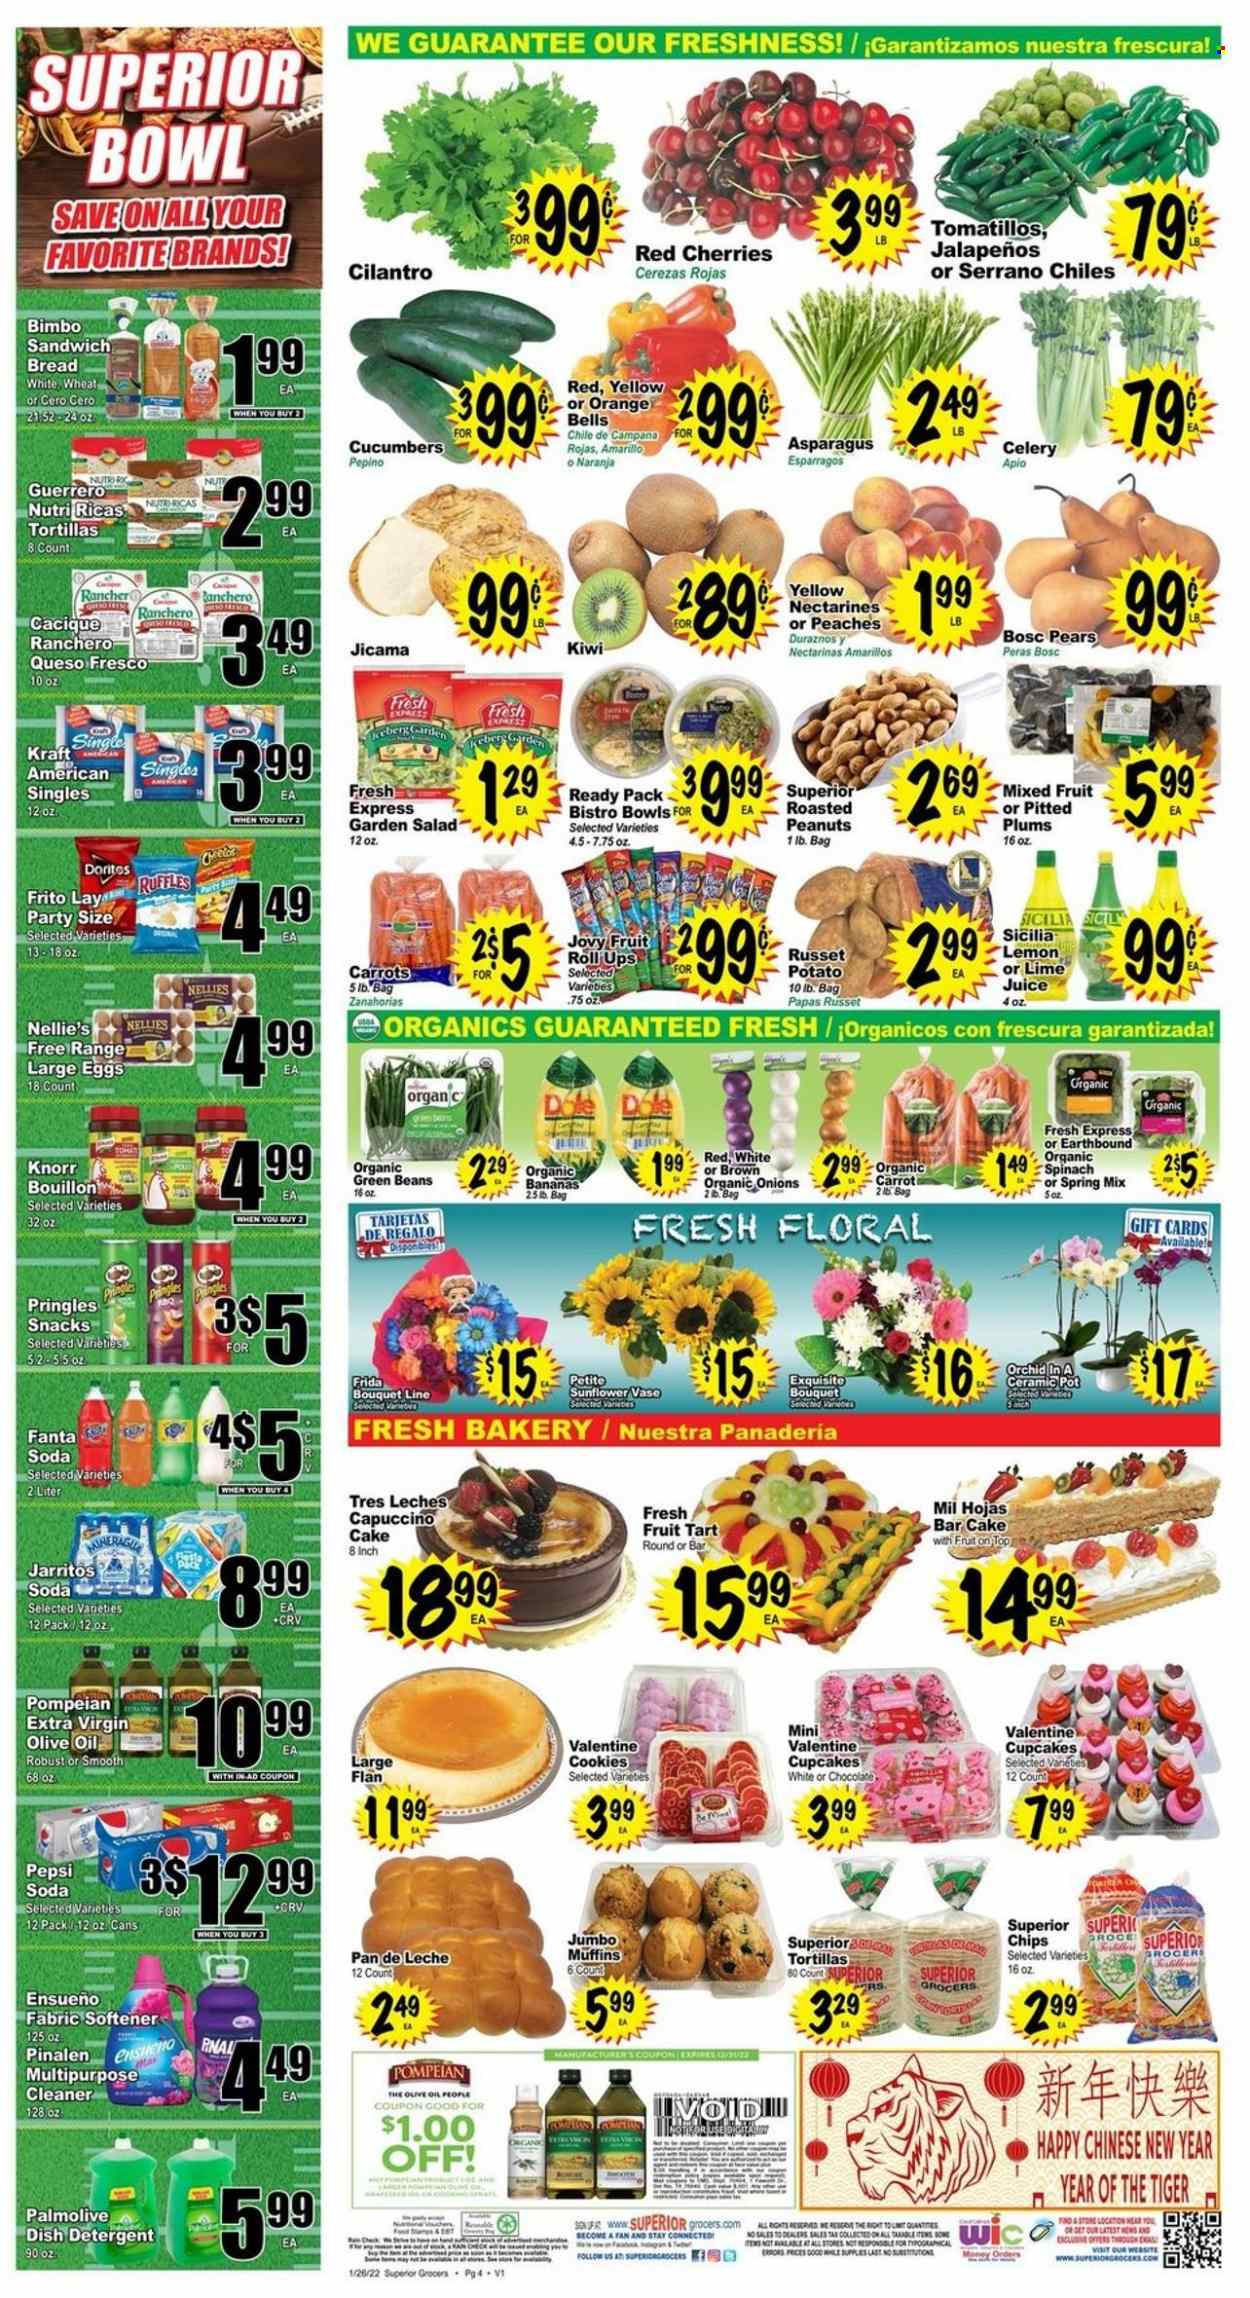 Superior Grocers ad  - 01.26.2022 - 02.01.2022.